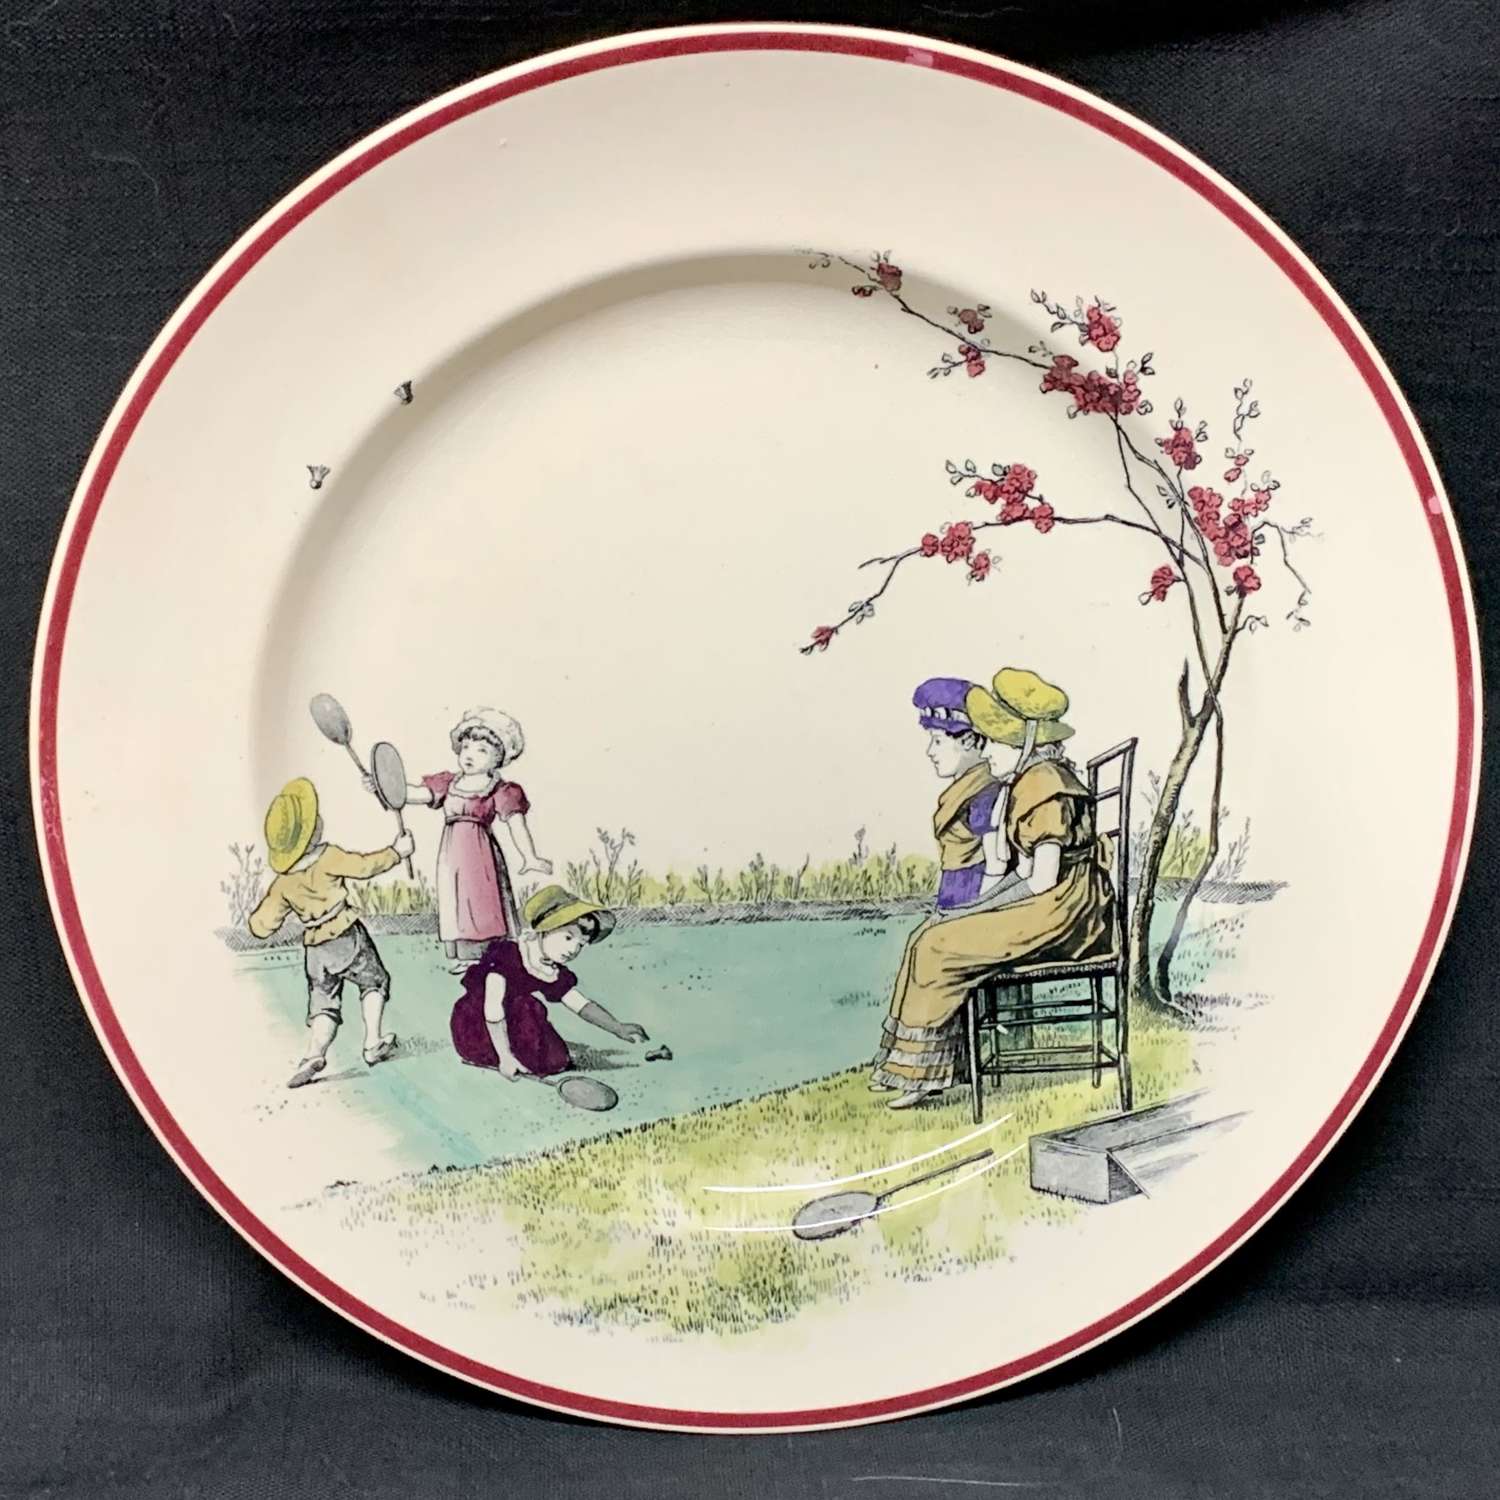 Kate Greenaway Pastime Brownfield Plate ~ 1883